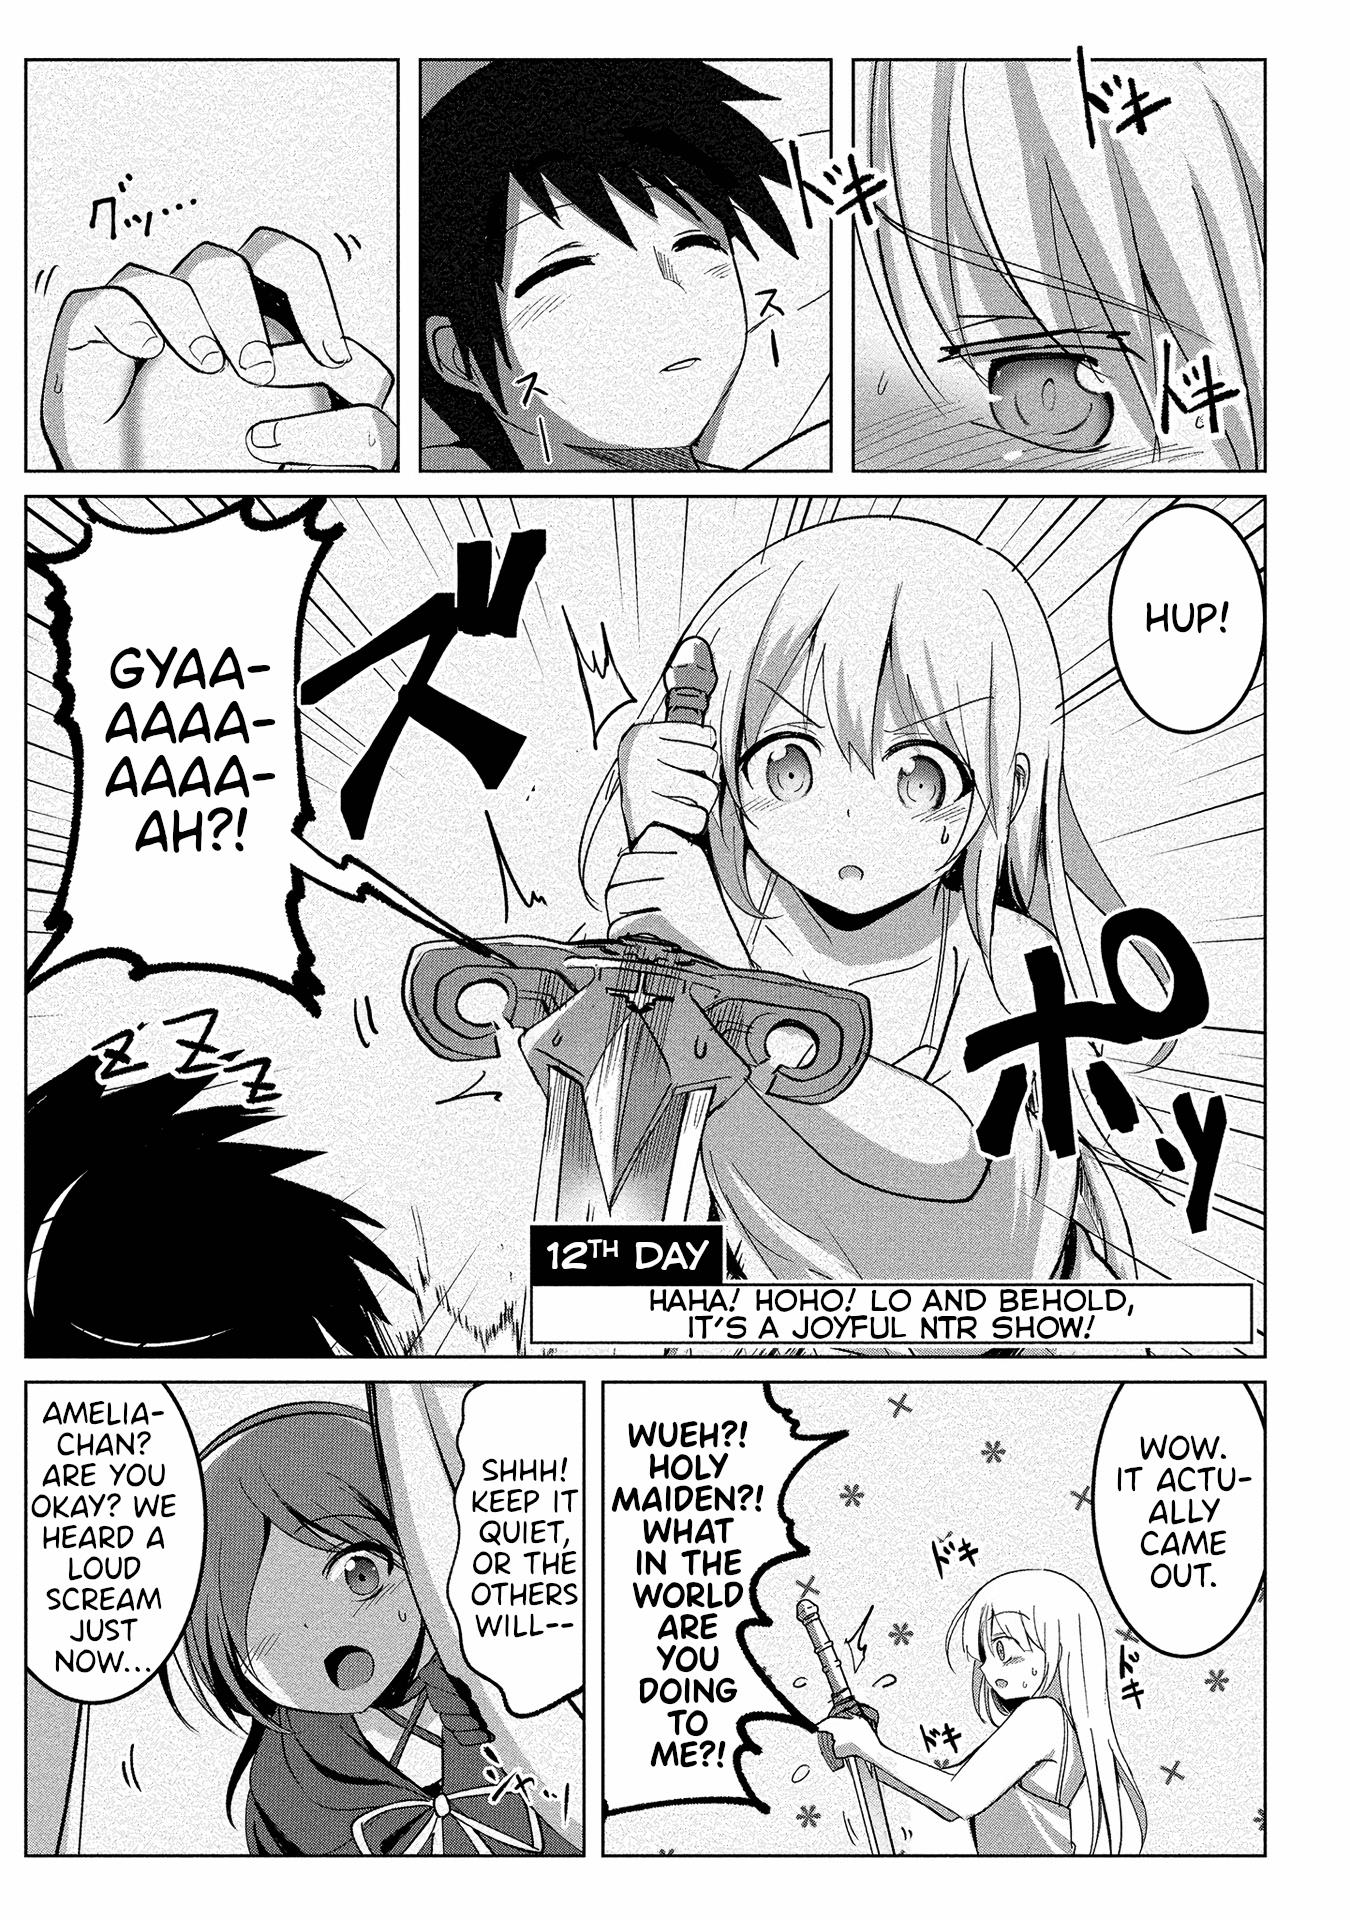 Dunking On Succubi In Another World Vol.2 Chapter 12: Haha! Hoho! Lo And Behold, It’S A Joyful Ntr Show! - Picture 1